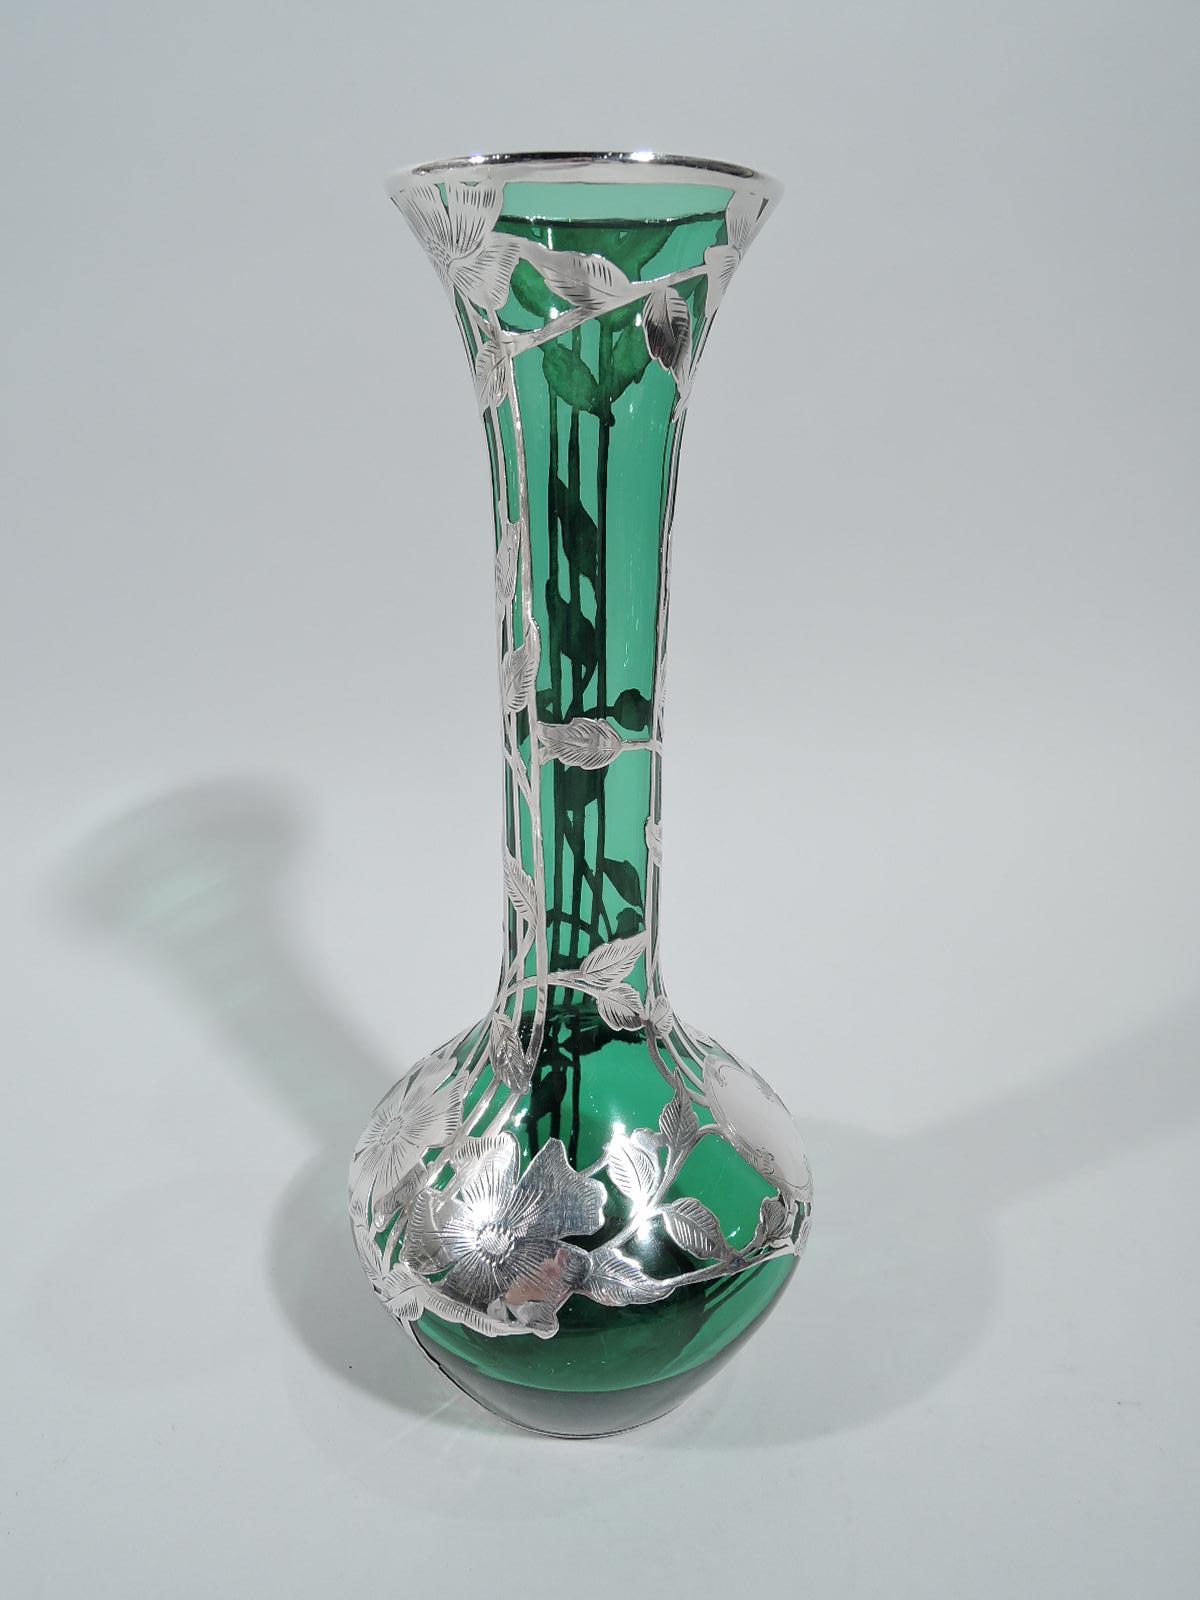 Turn of the century Art Nouveau glass vase with engraved silver overlay. Made by Alvin in Providence. Tapering bowl, cylindrical neck, and flared mouth. Groups of vertical trellis lines entwined with stem flowers. Bowl shoulder has flower-head